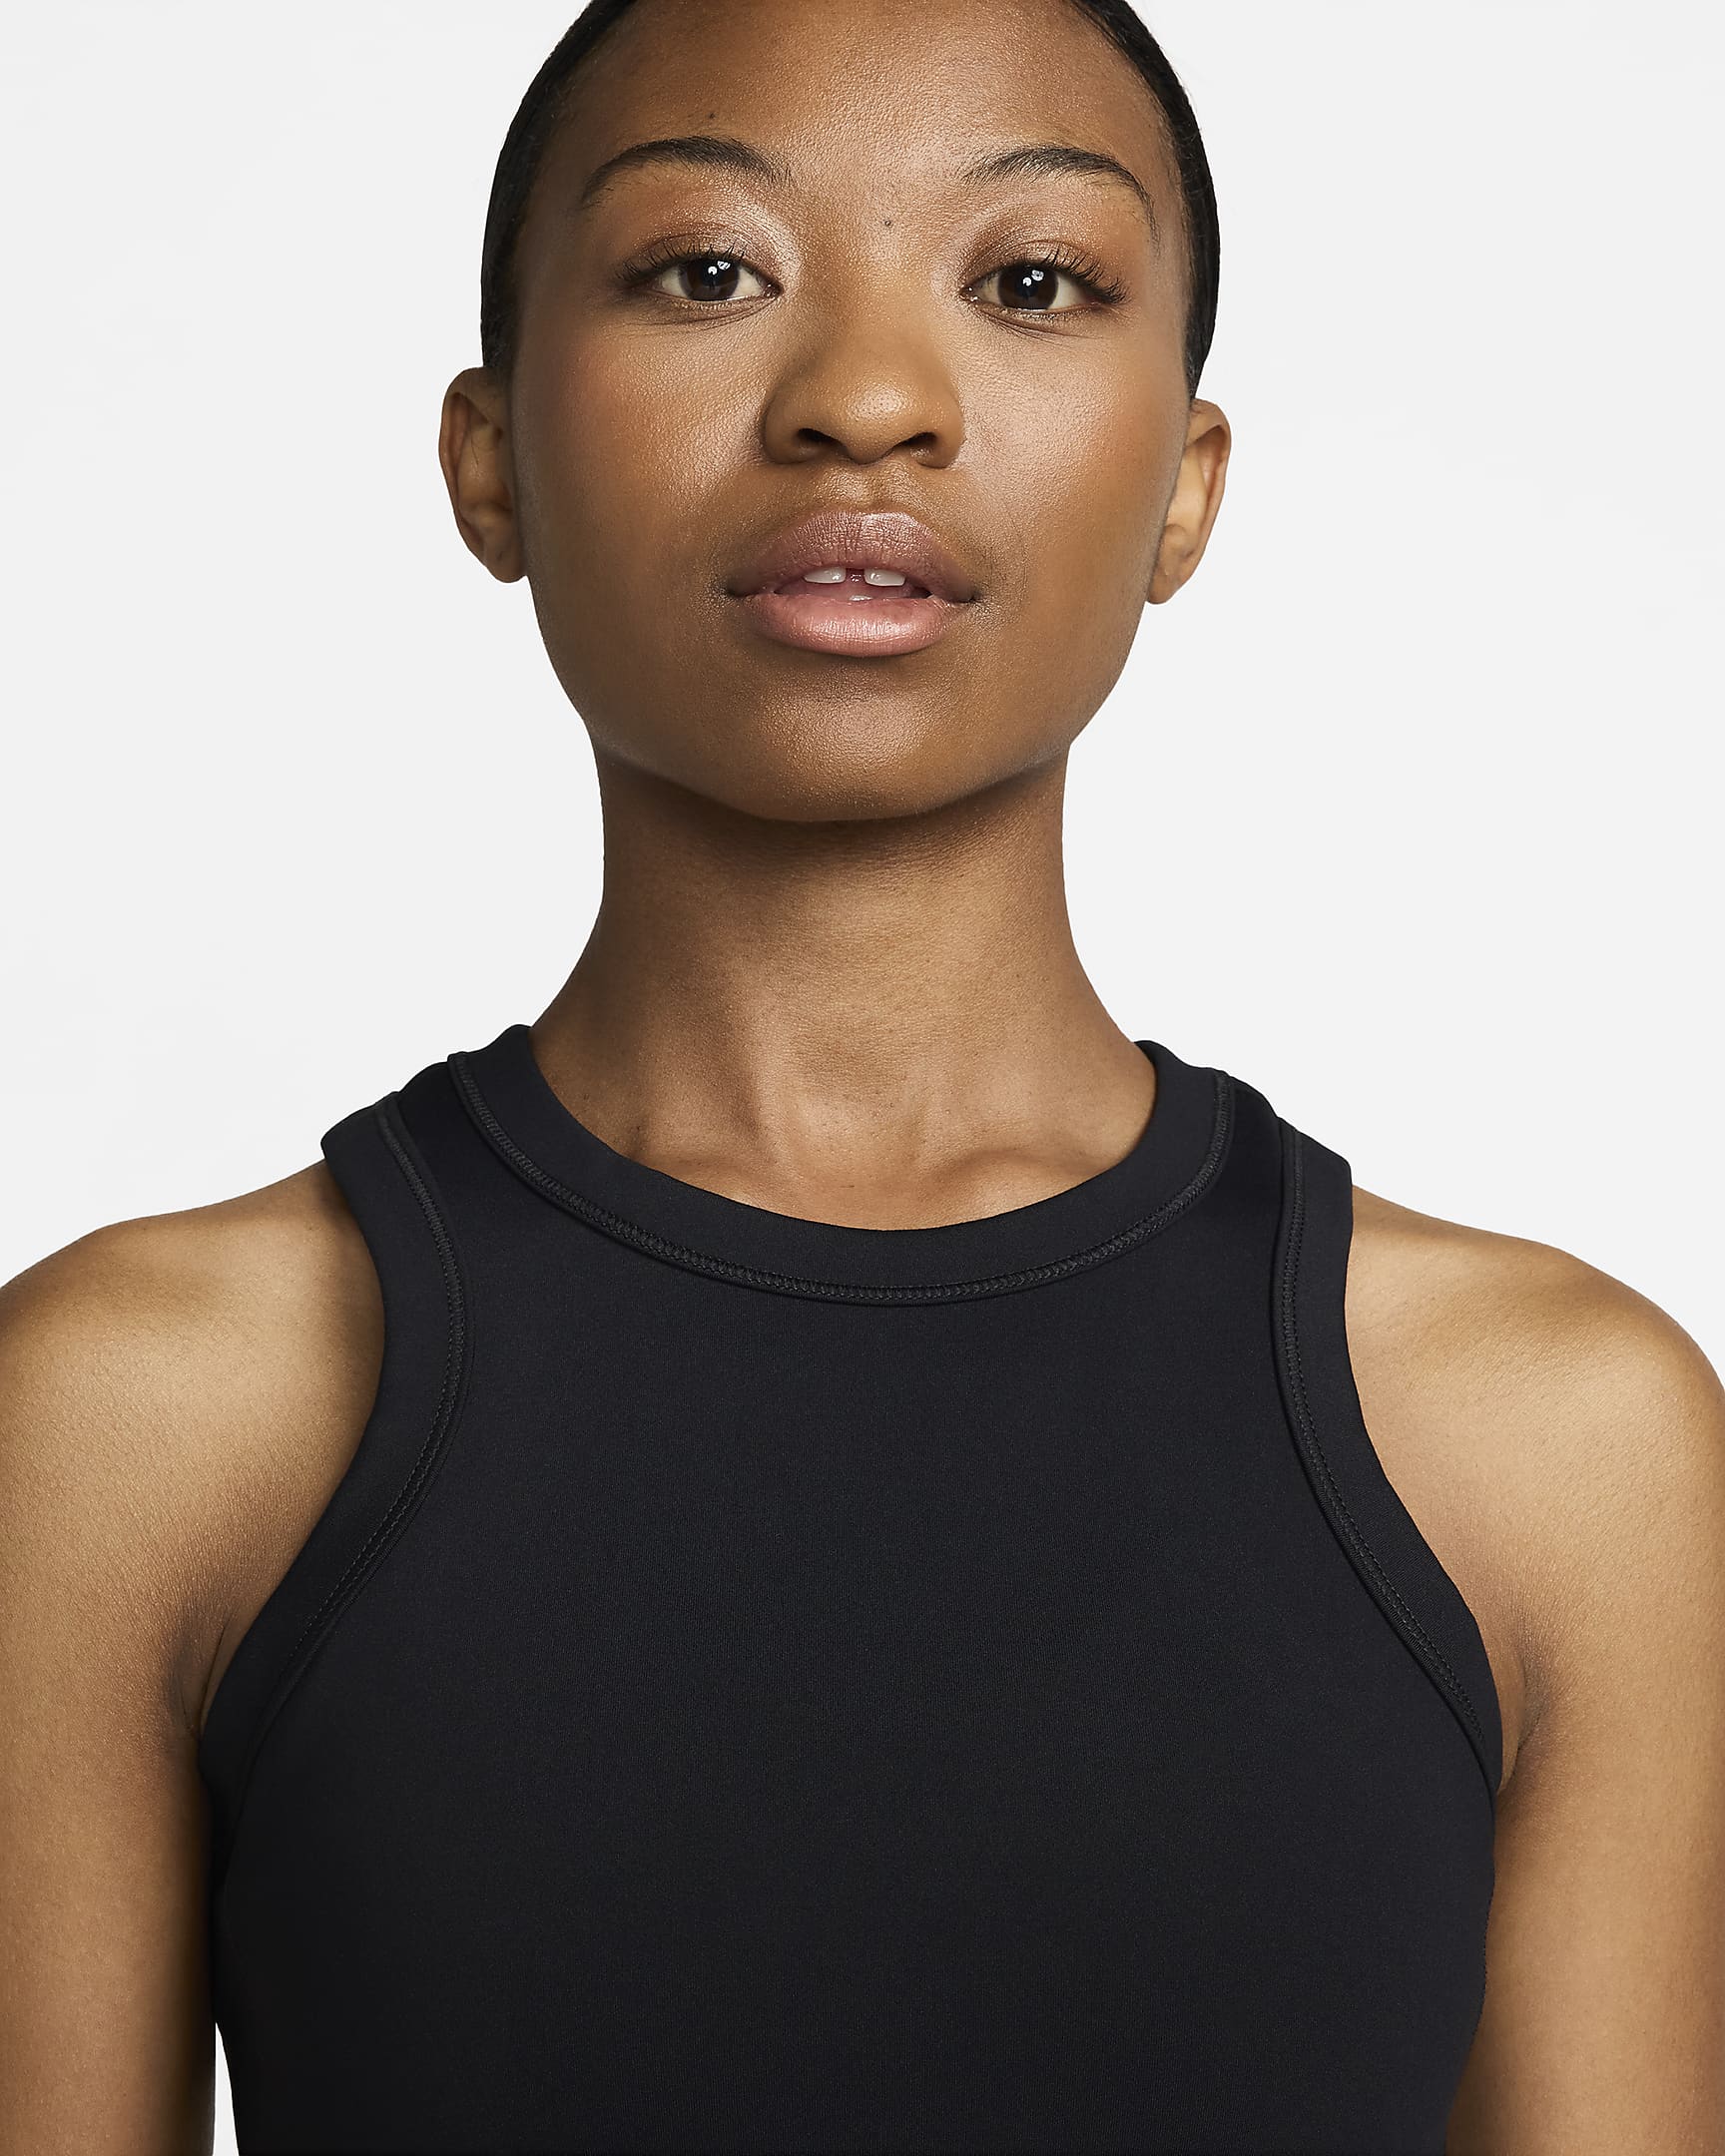 Nike One Fitted Women's Dri-FIT Cropped Tank Top - Black/Black